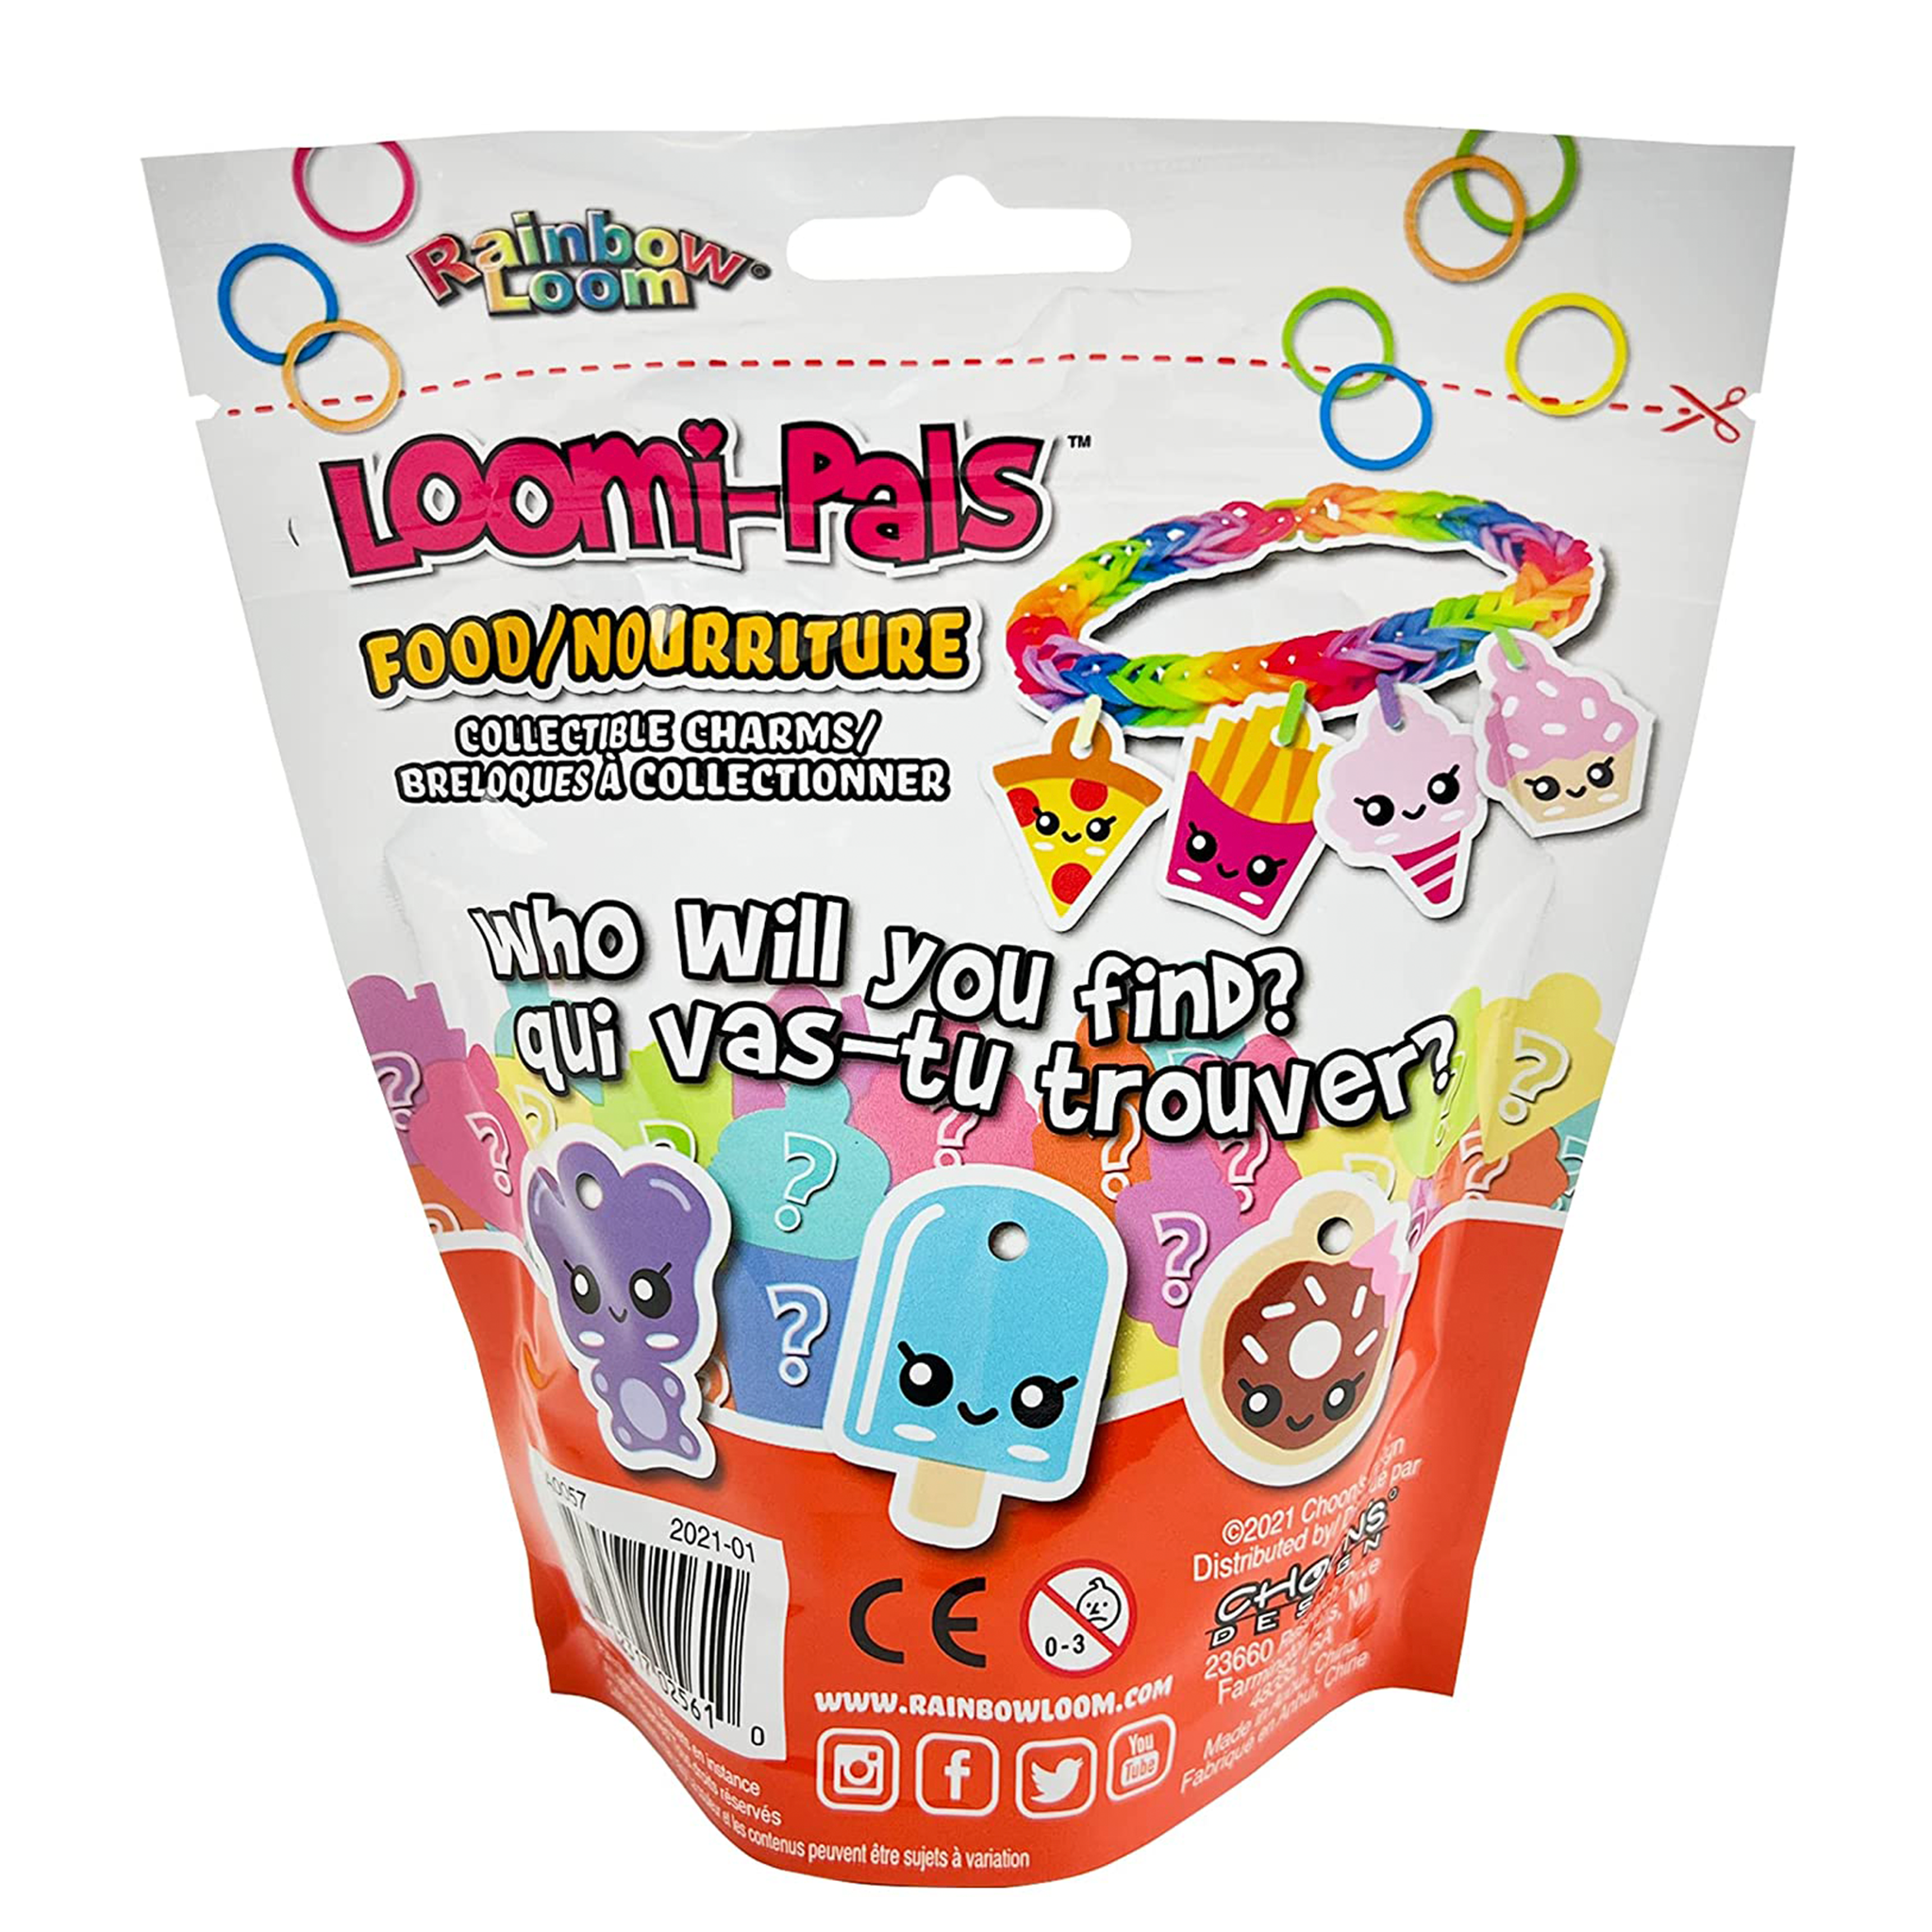 Rainbow Loom - Say hello to our new products, Loomi-Pals charms! Coming to  stores in November this year! #loomipals #rainbowloomcharm #rainbowloom